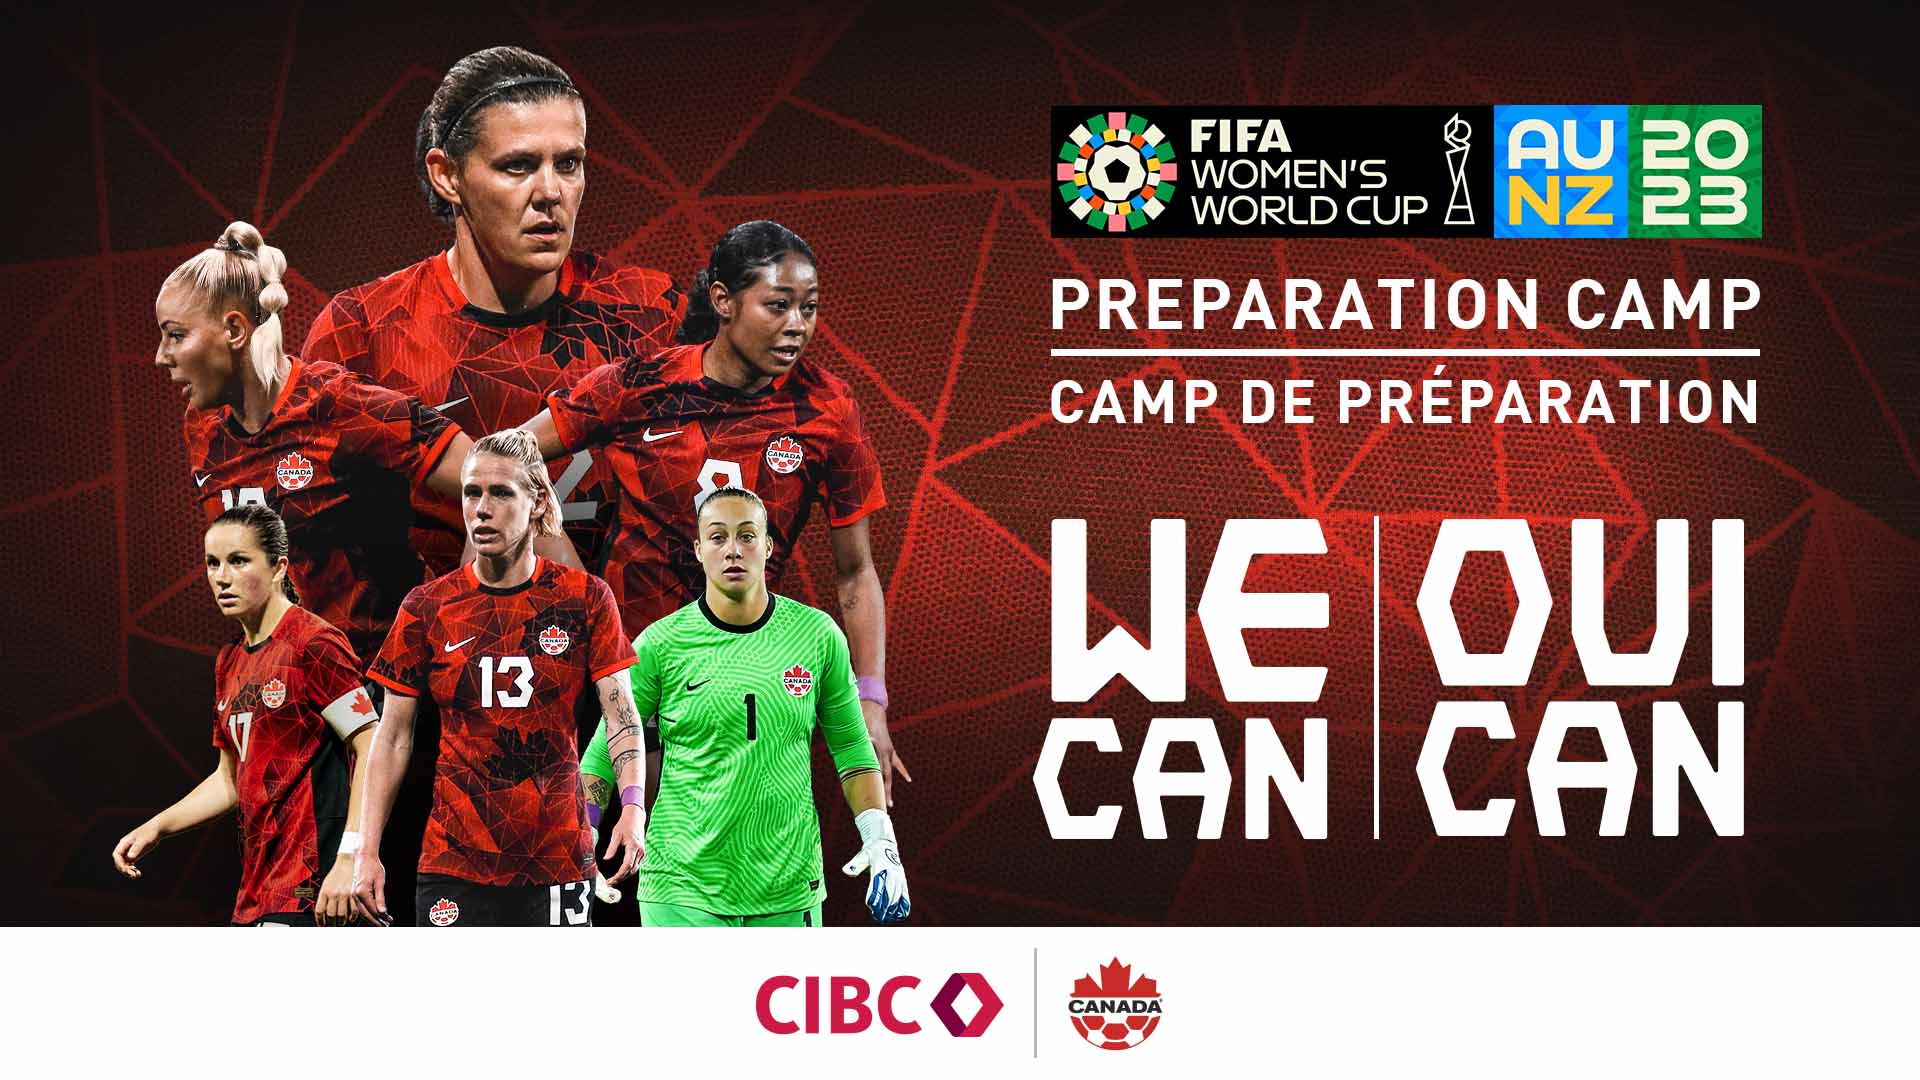 Canada Soccer announces roster for preparation camp ahead of FIFA Womens World Cup